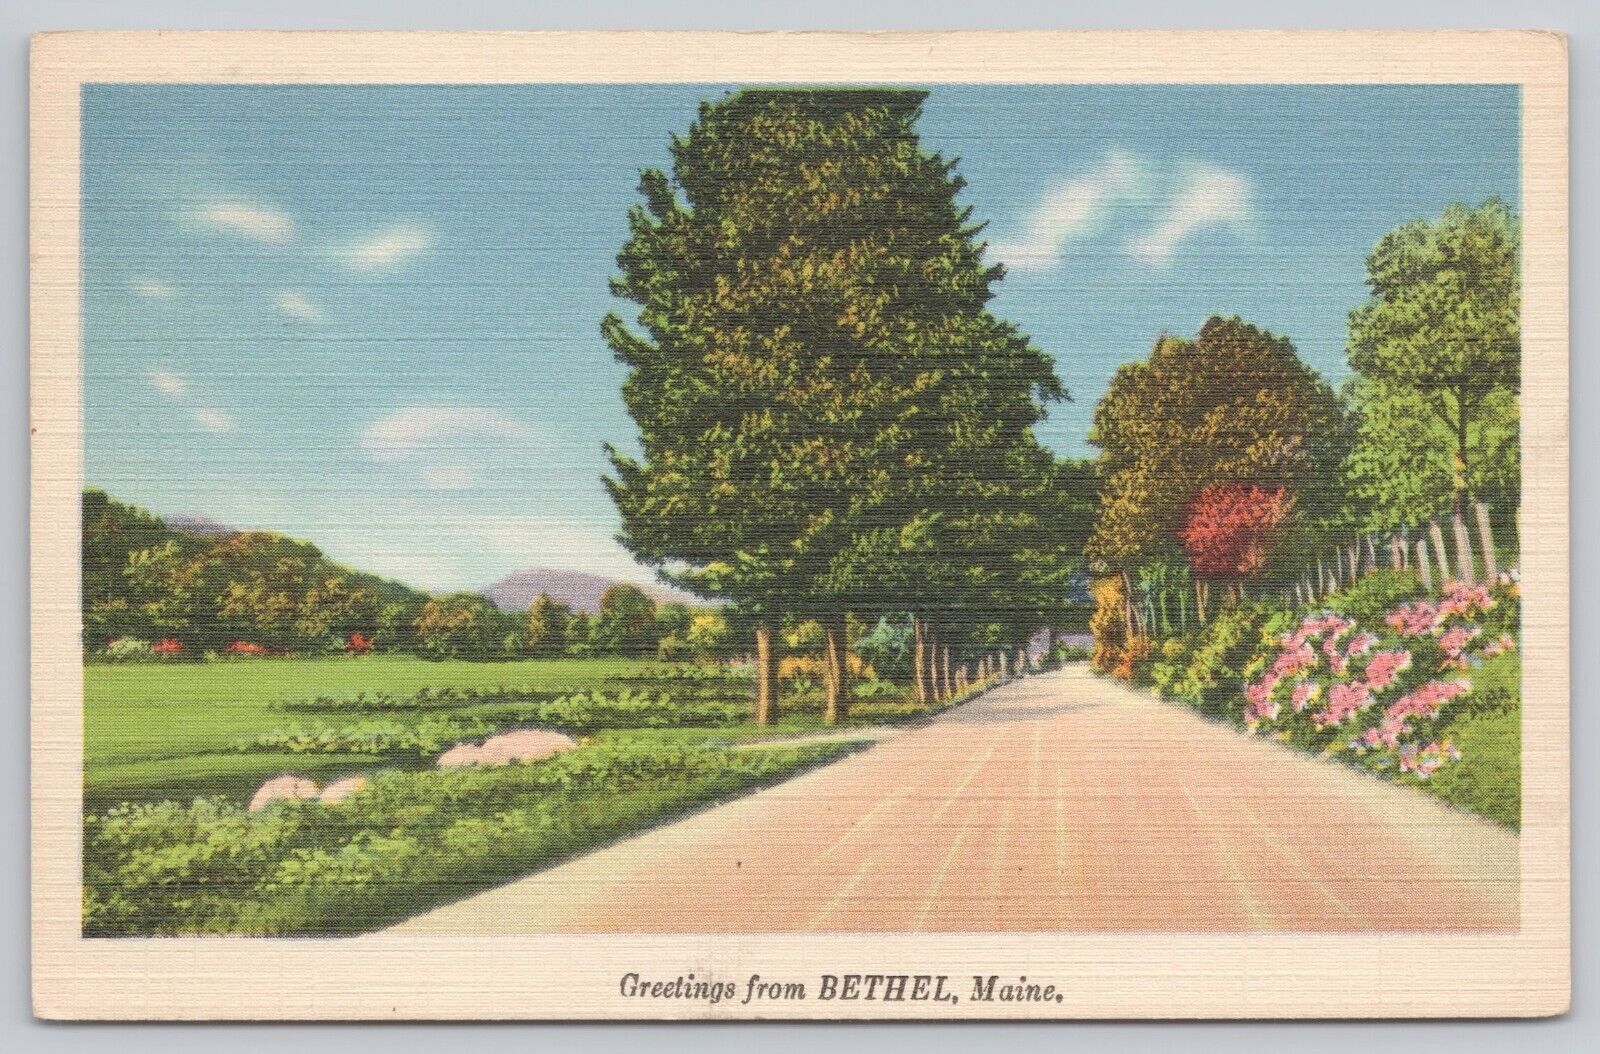 Bethel Maine, Greetings, Country Road Scenic View, Vintage Postcard